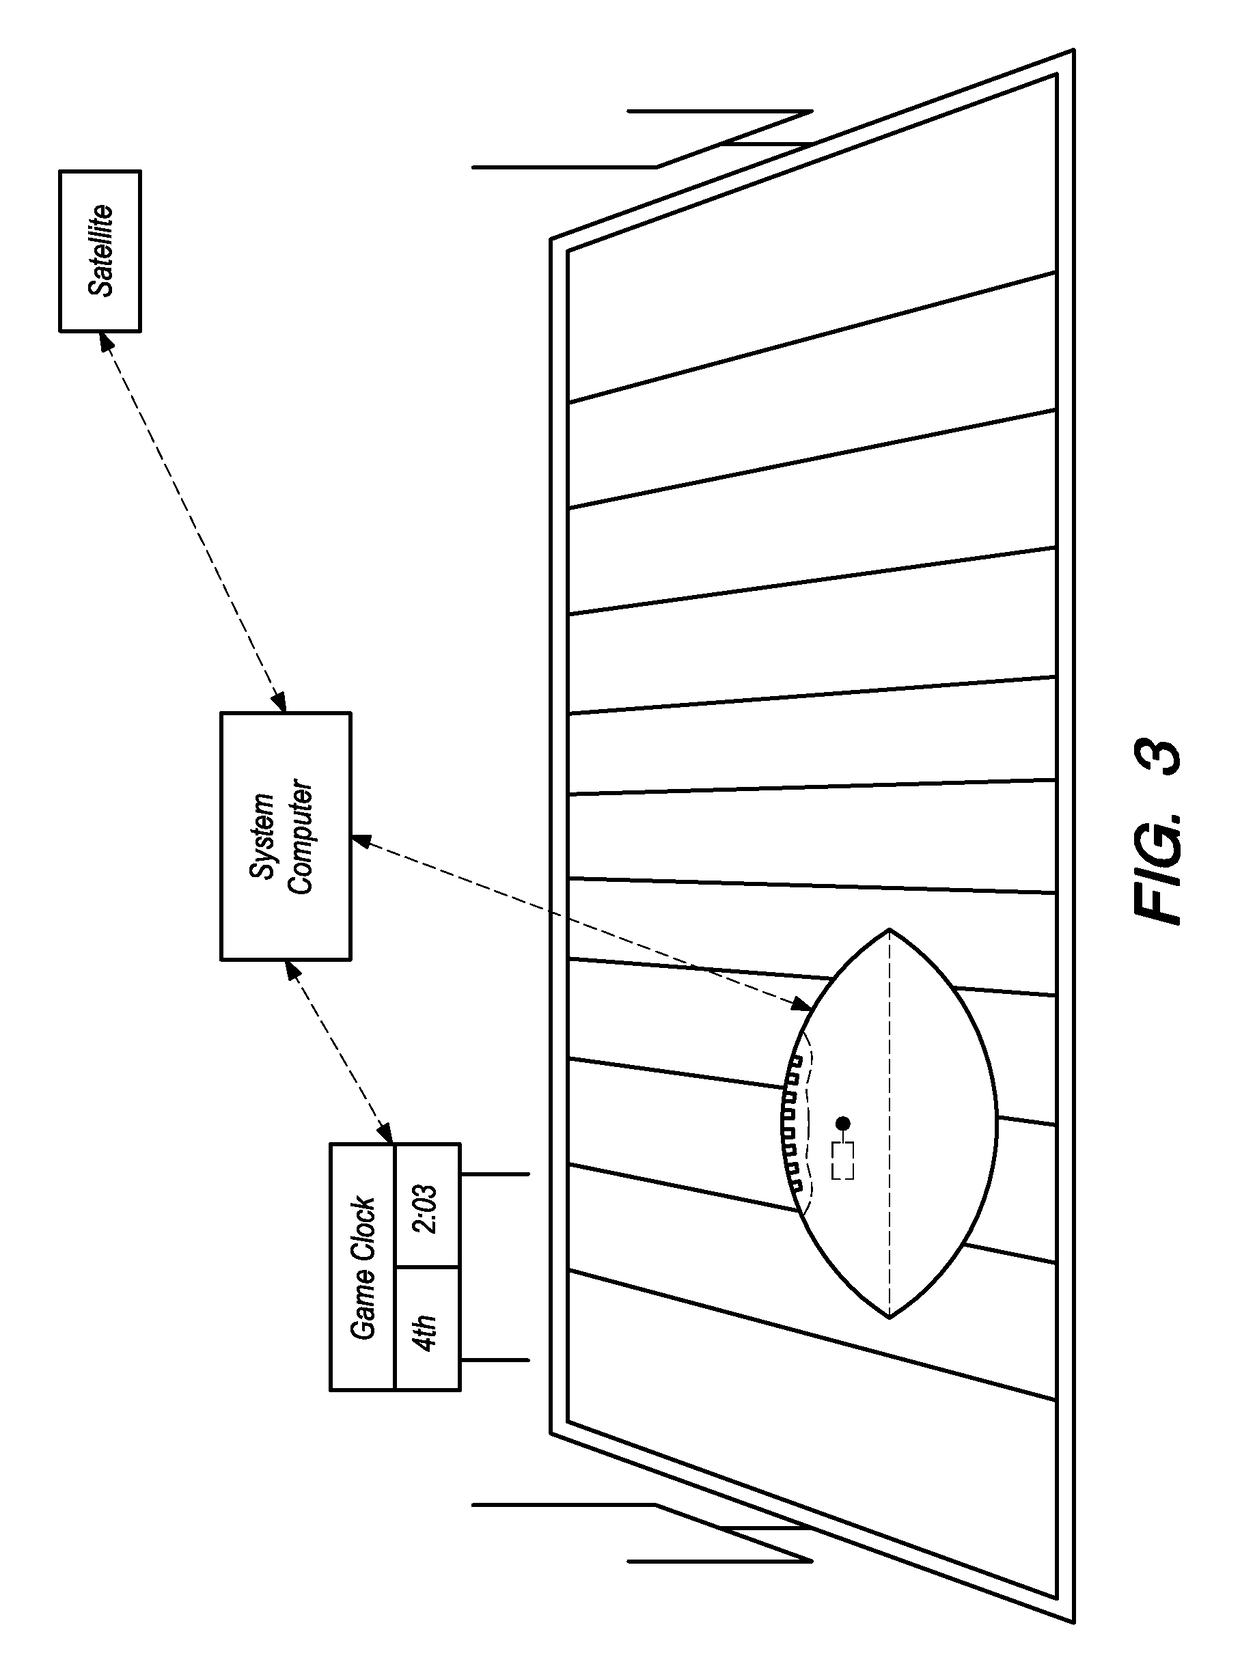 Sports Game Ball Tracking System and Method